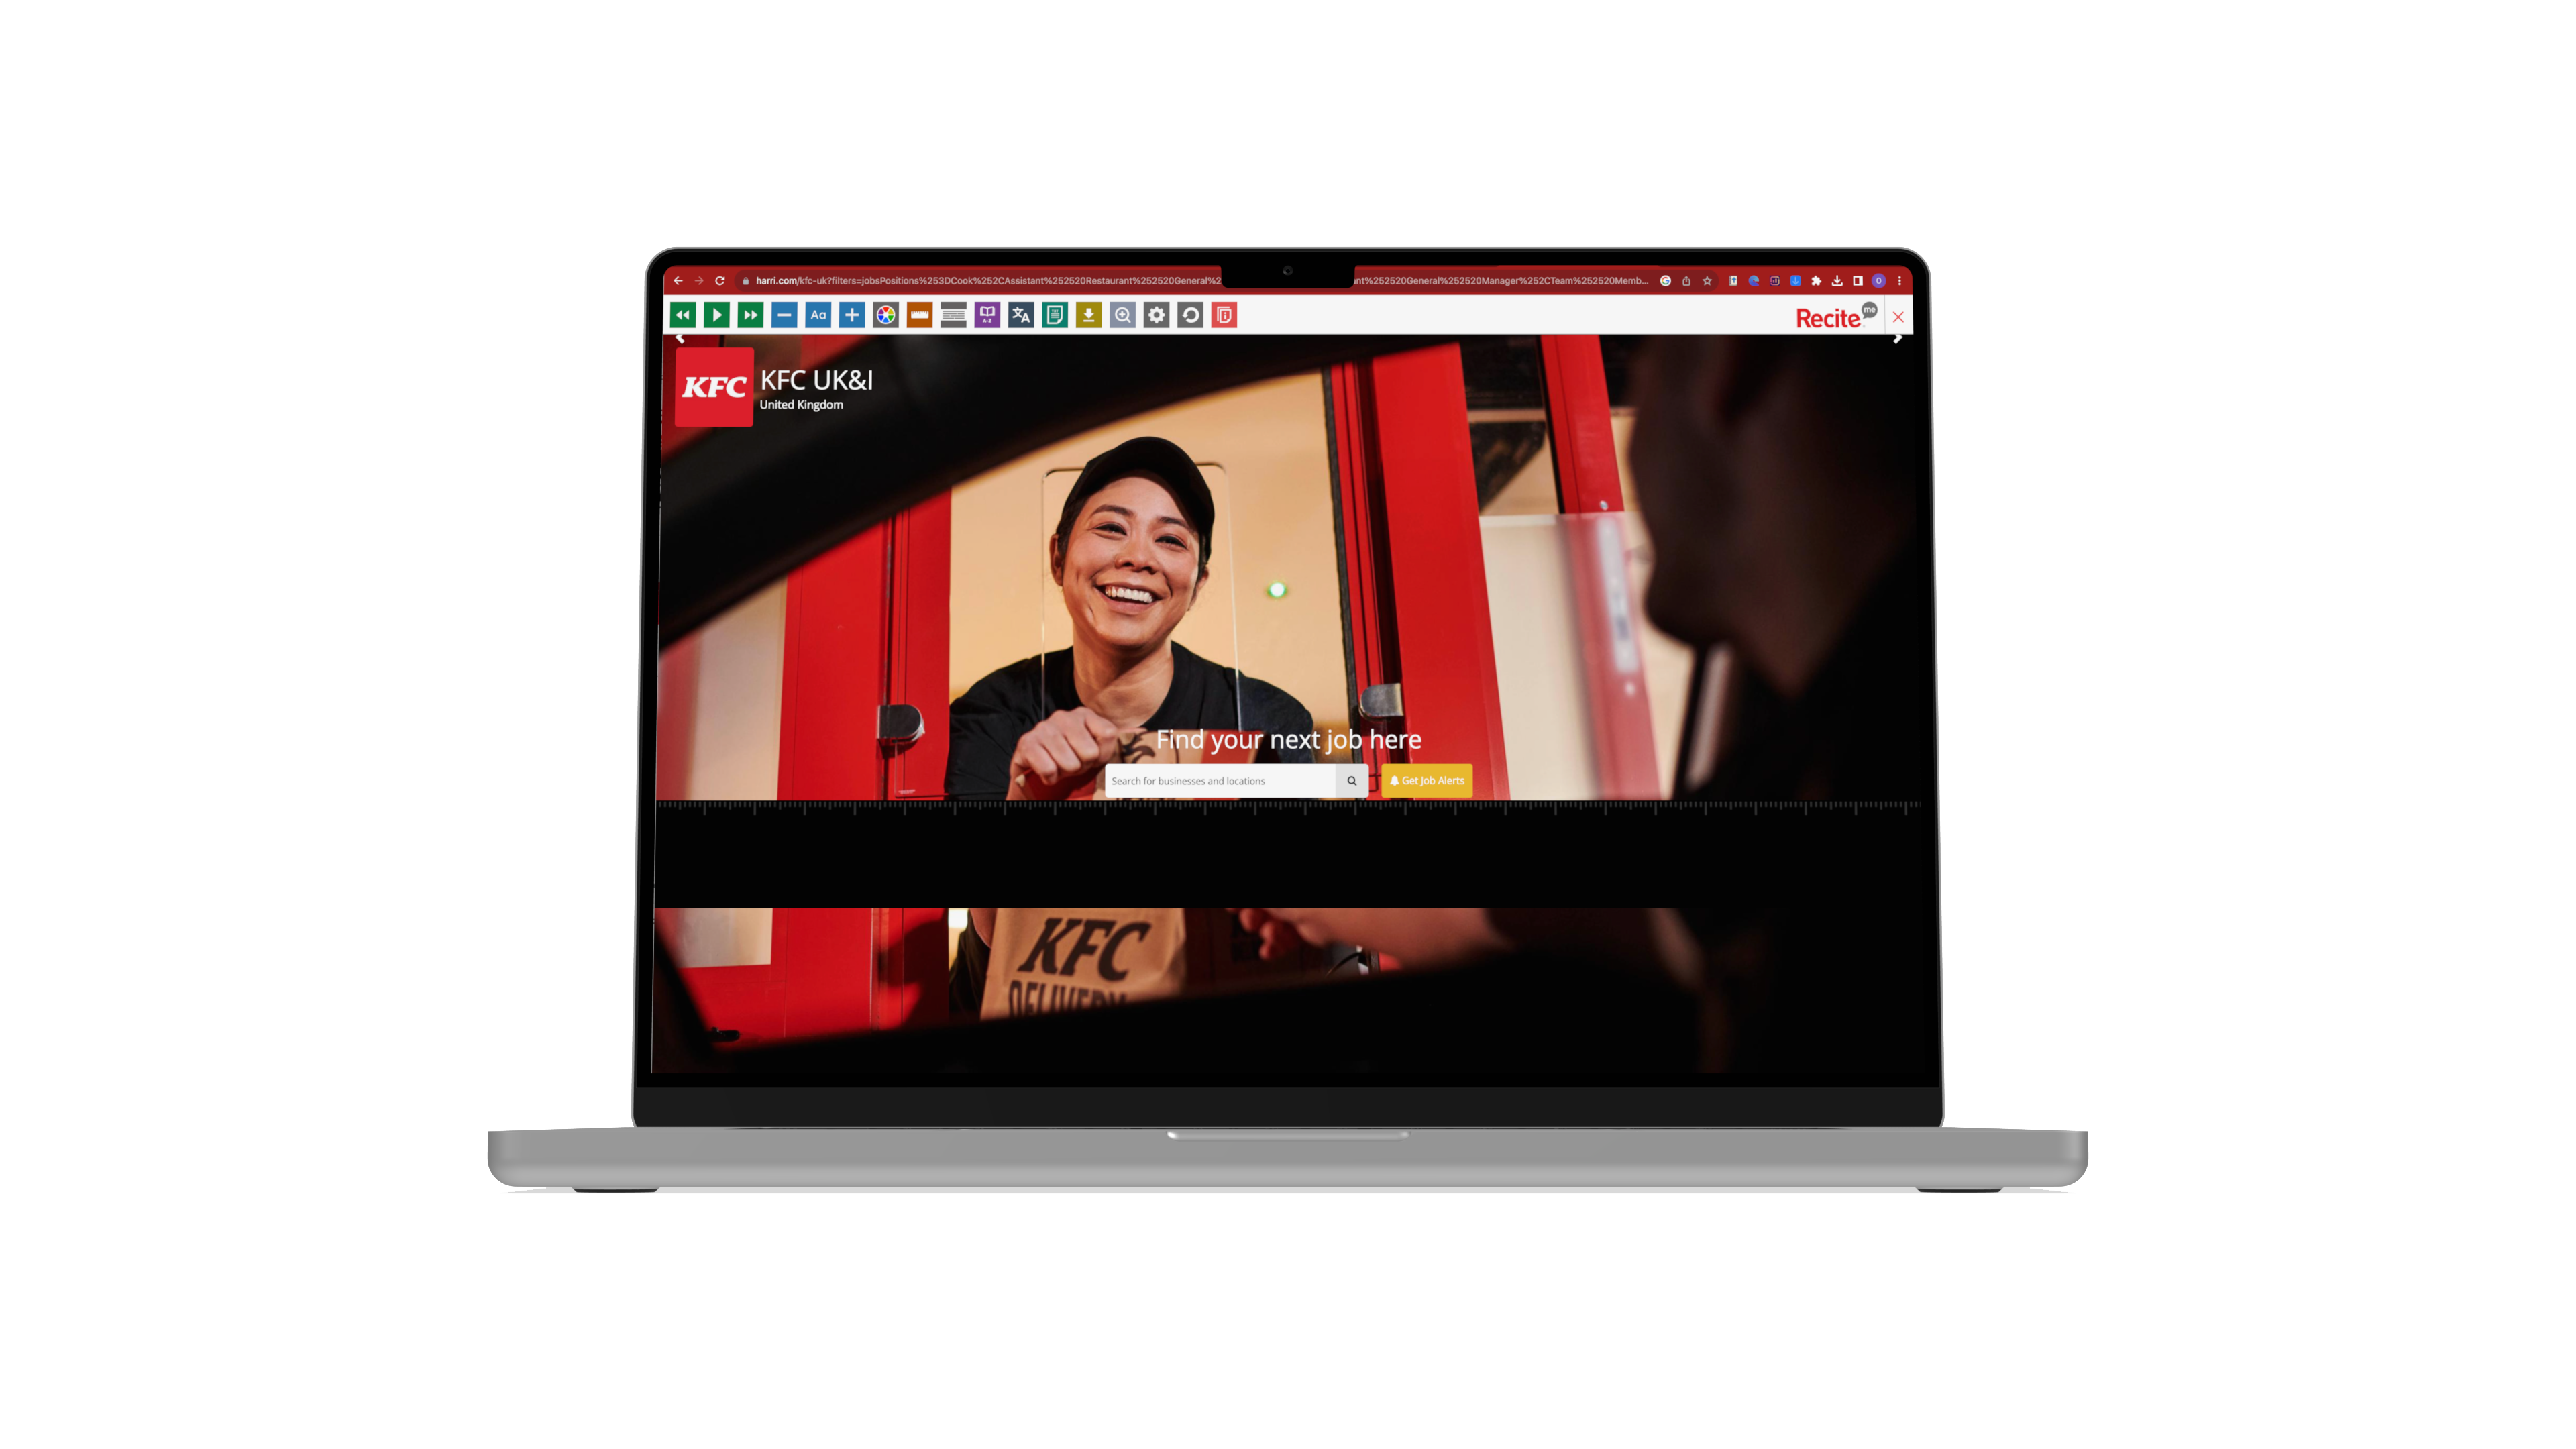 Mock-up of the Recite Me toolbar being used on the KFC website